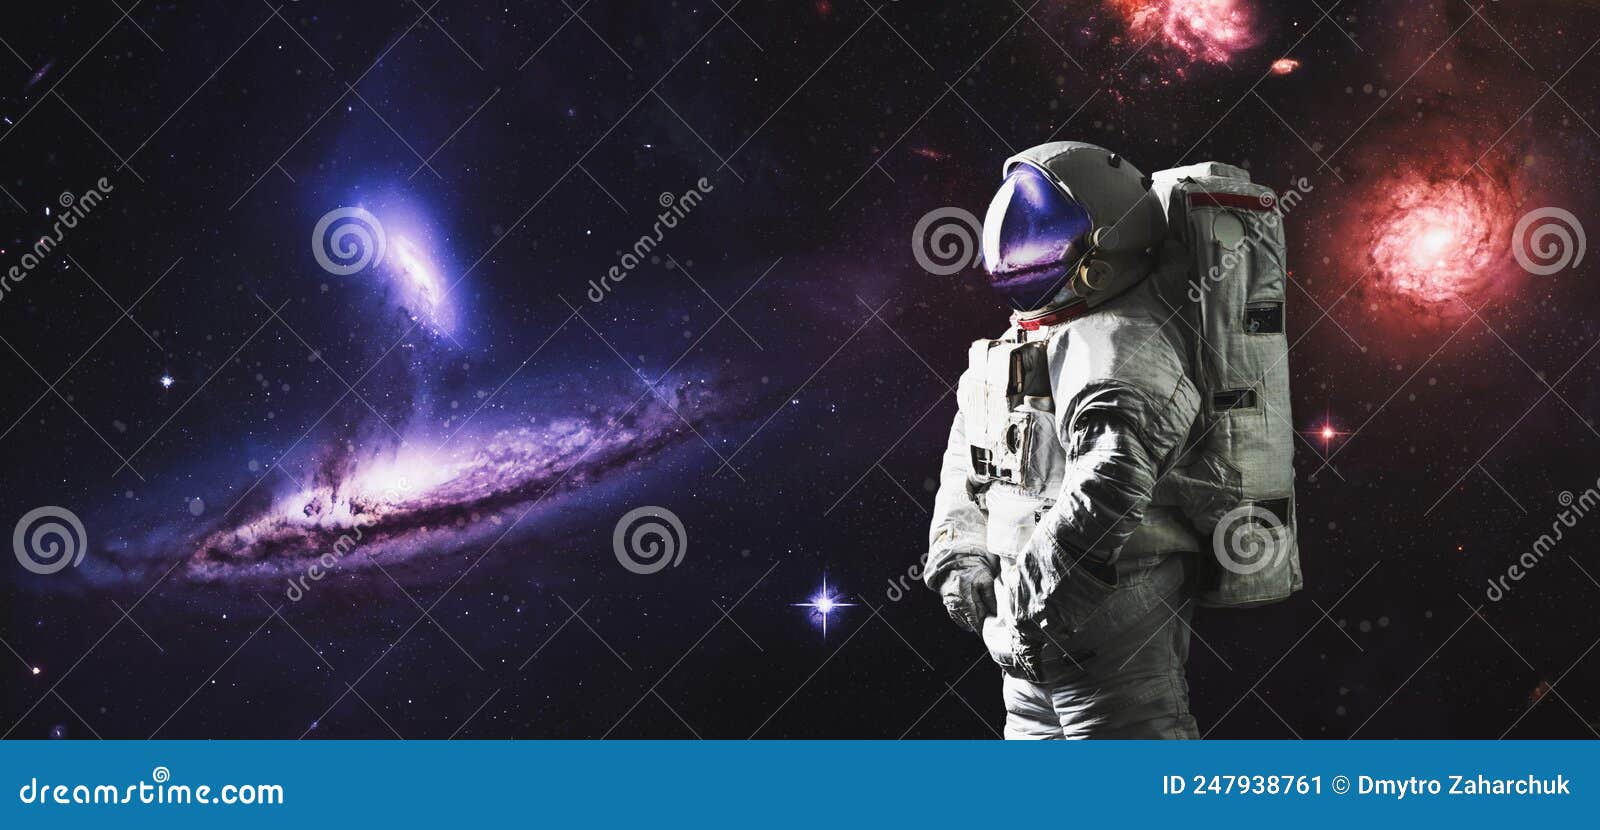 Space Wallpaper - Apps on Google Play